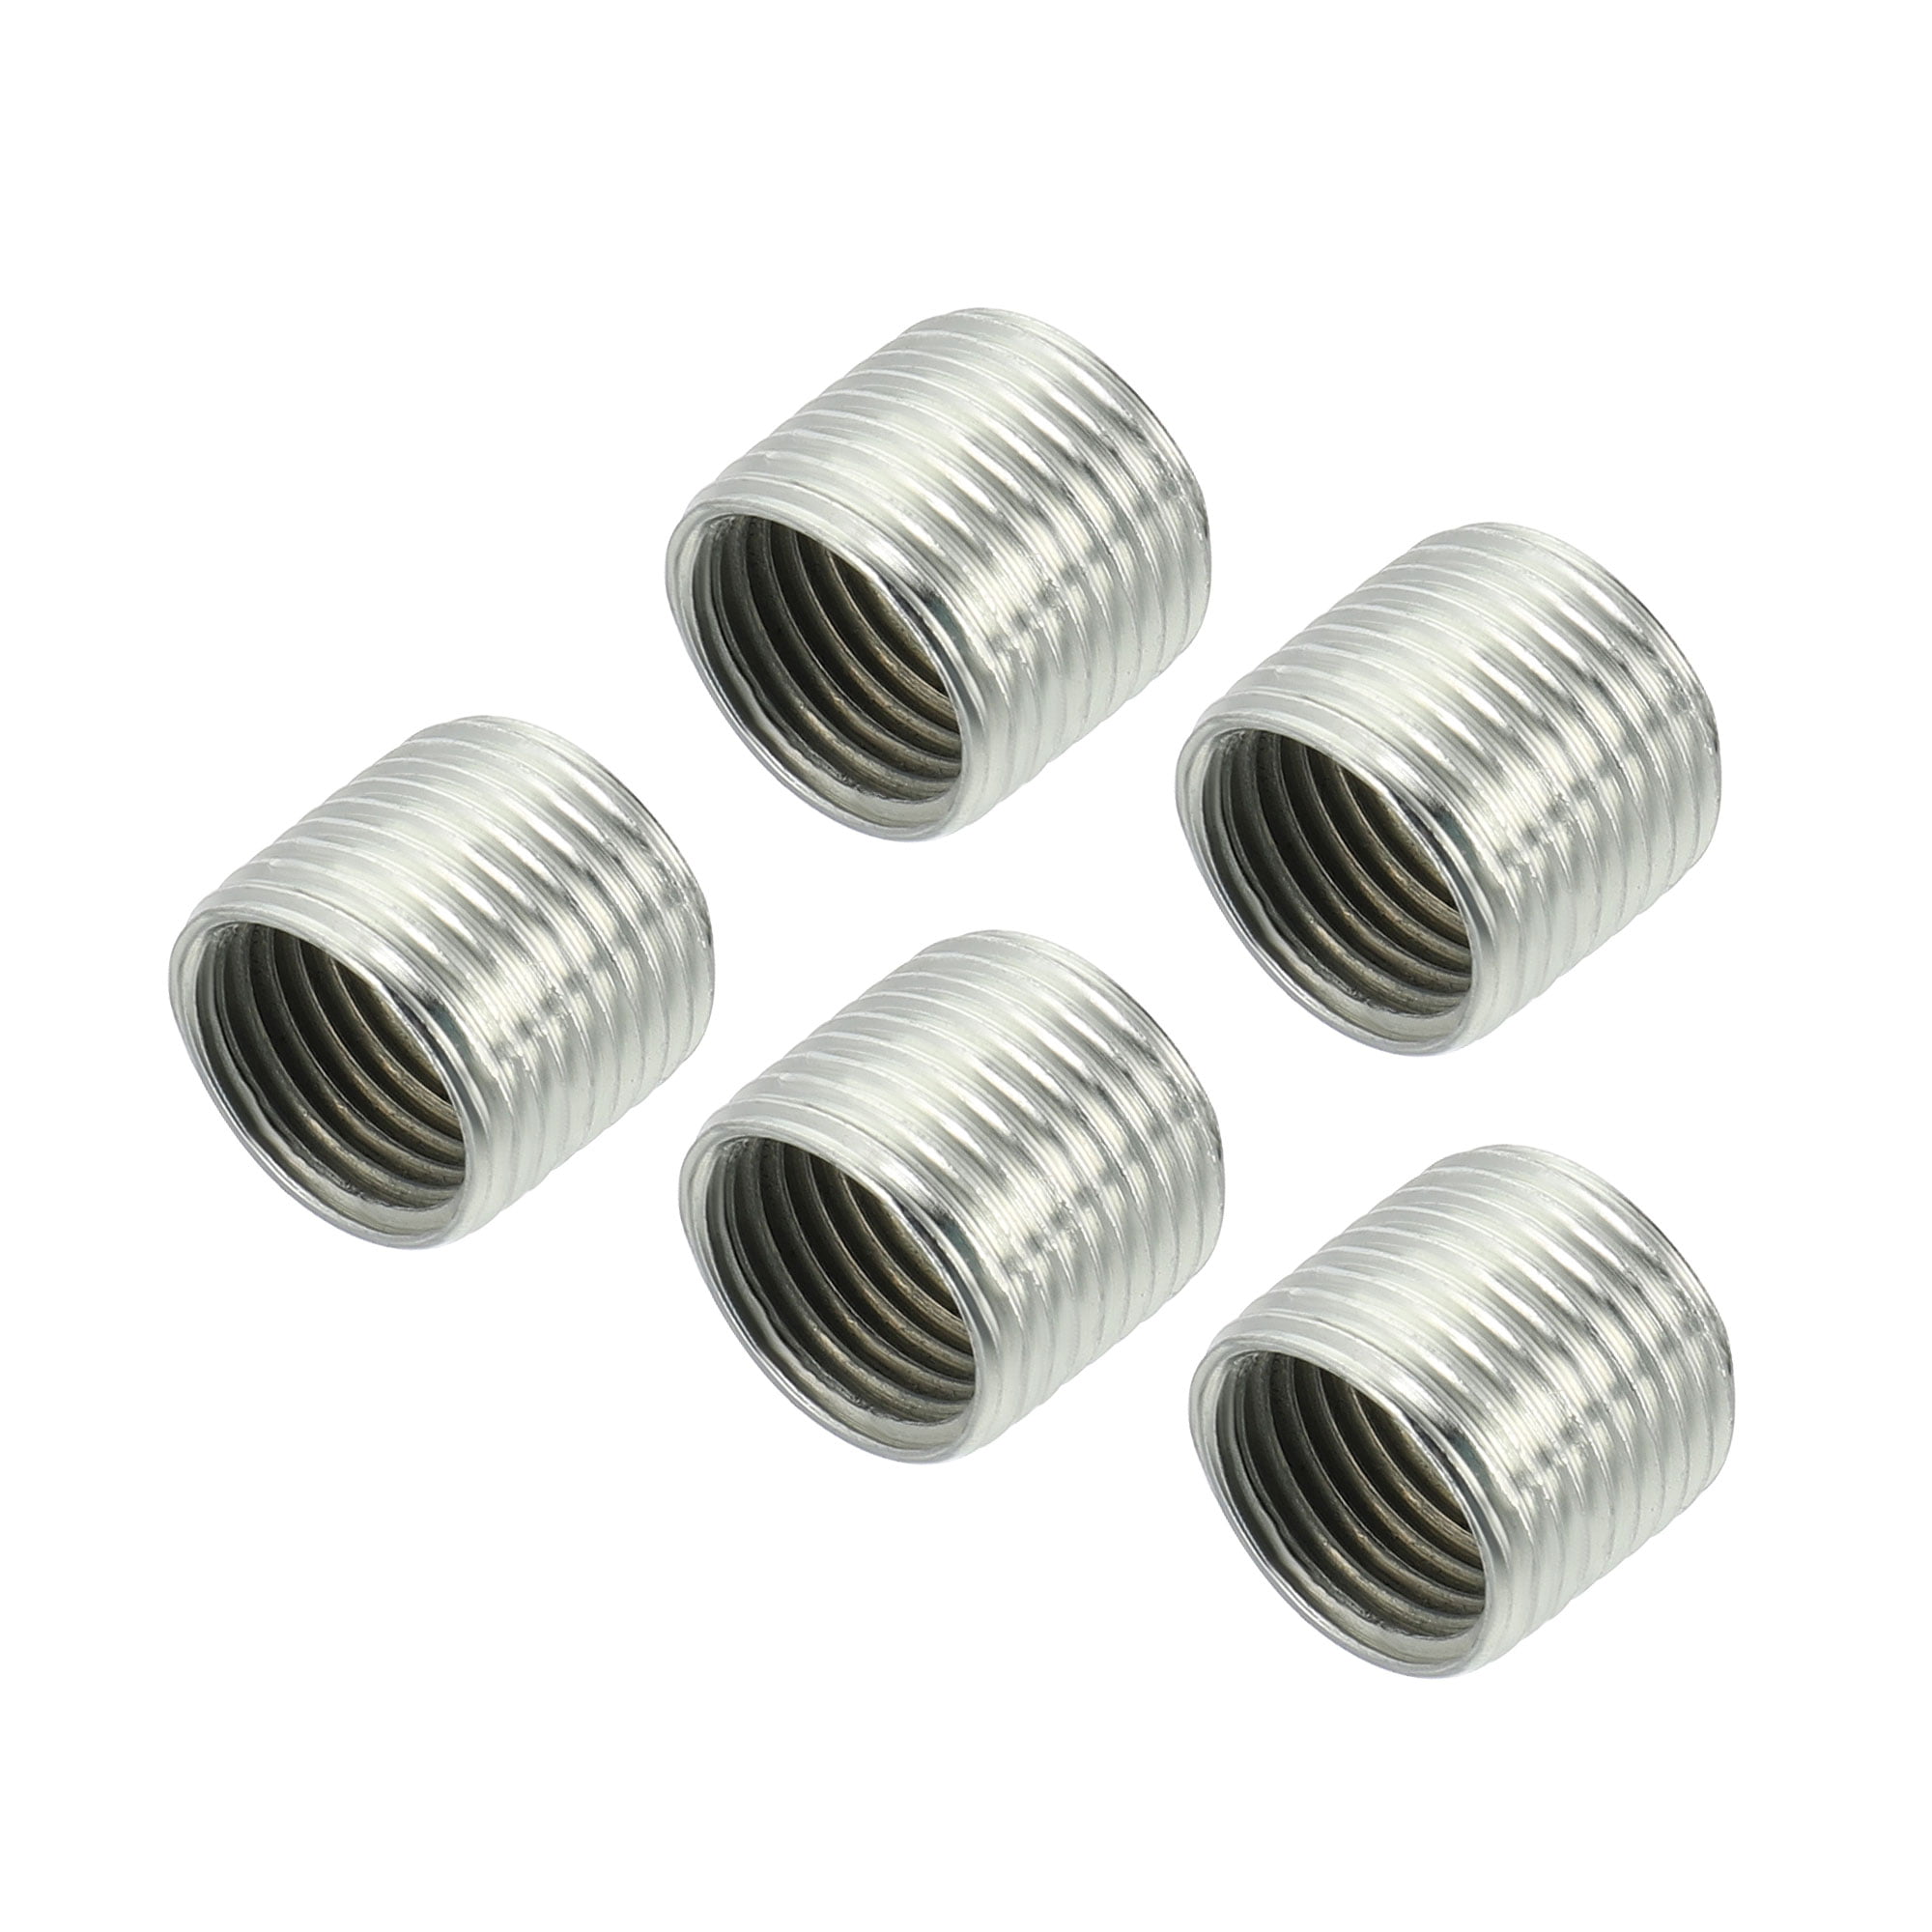 Reducers Threaded A2L3 M10 10mm Male to M8 8mm Female 5 X Thread Adapters 